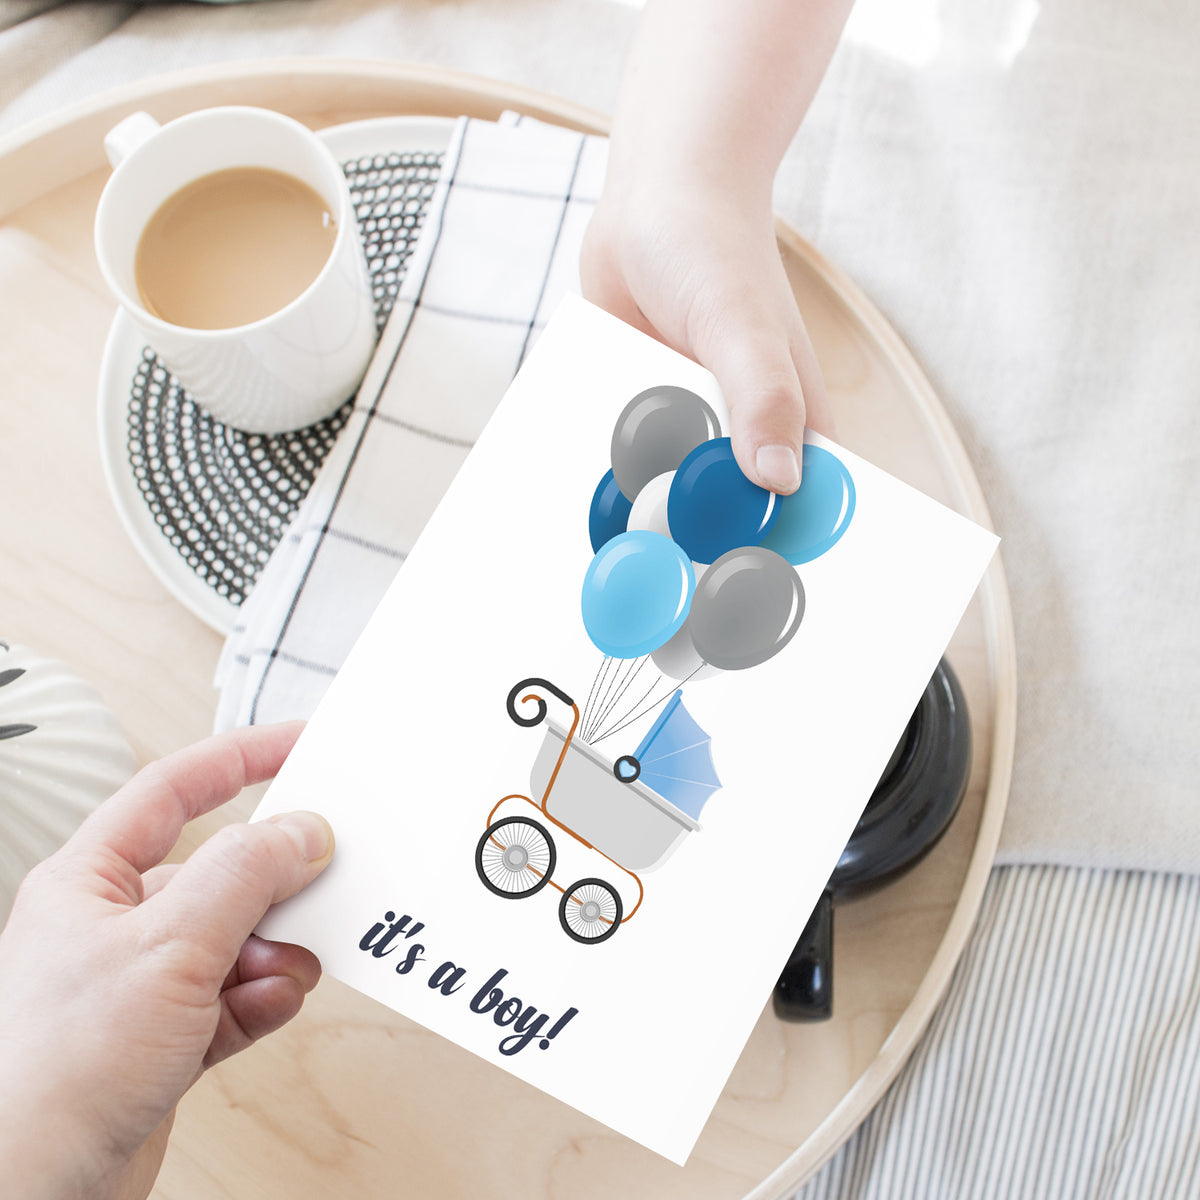 It's A Boy! – Blue Stroller & Balloons – Baby Shower Greeting Cards for New Mom Dad Parents, Welcome New Baby, Congrats, Gender Reveal – 10 per Pack